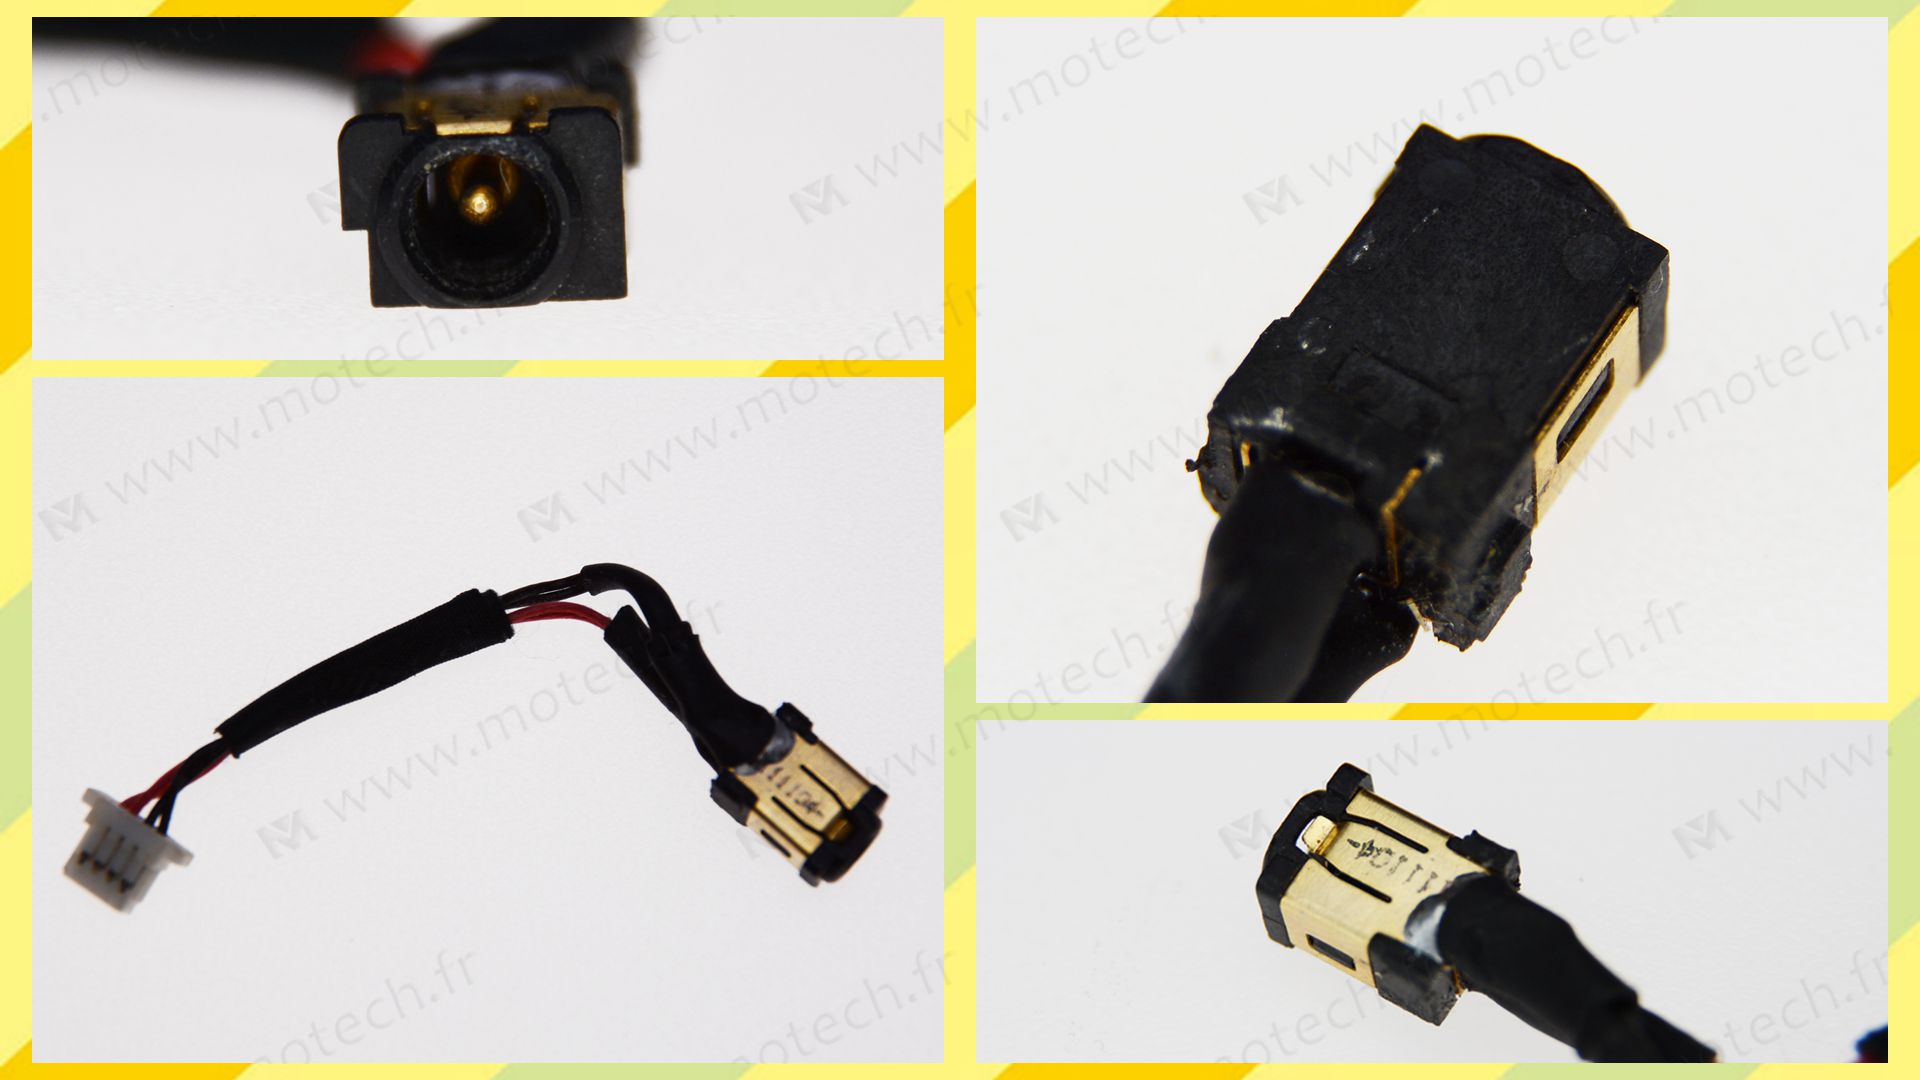 Acer S7-191 charging connector, Acer S7-191 DC Power Jack, Acer S7-191 DC IN Cable, Acer S7-191 Power Jack, Acer S7-191 plug, Acer S7-191 Jack socket, Acer S7-191 connecteur de charge, 